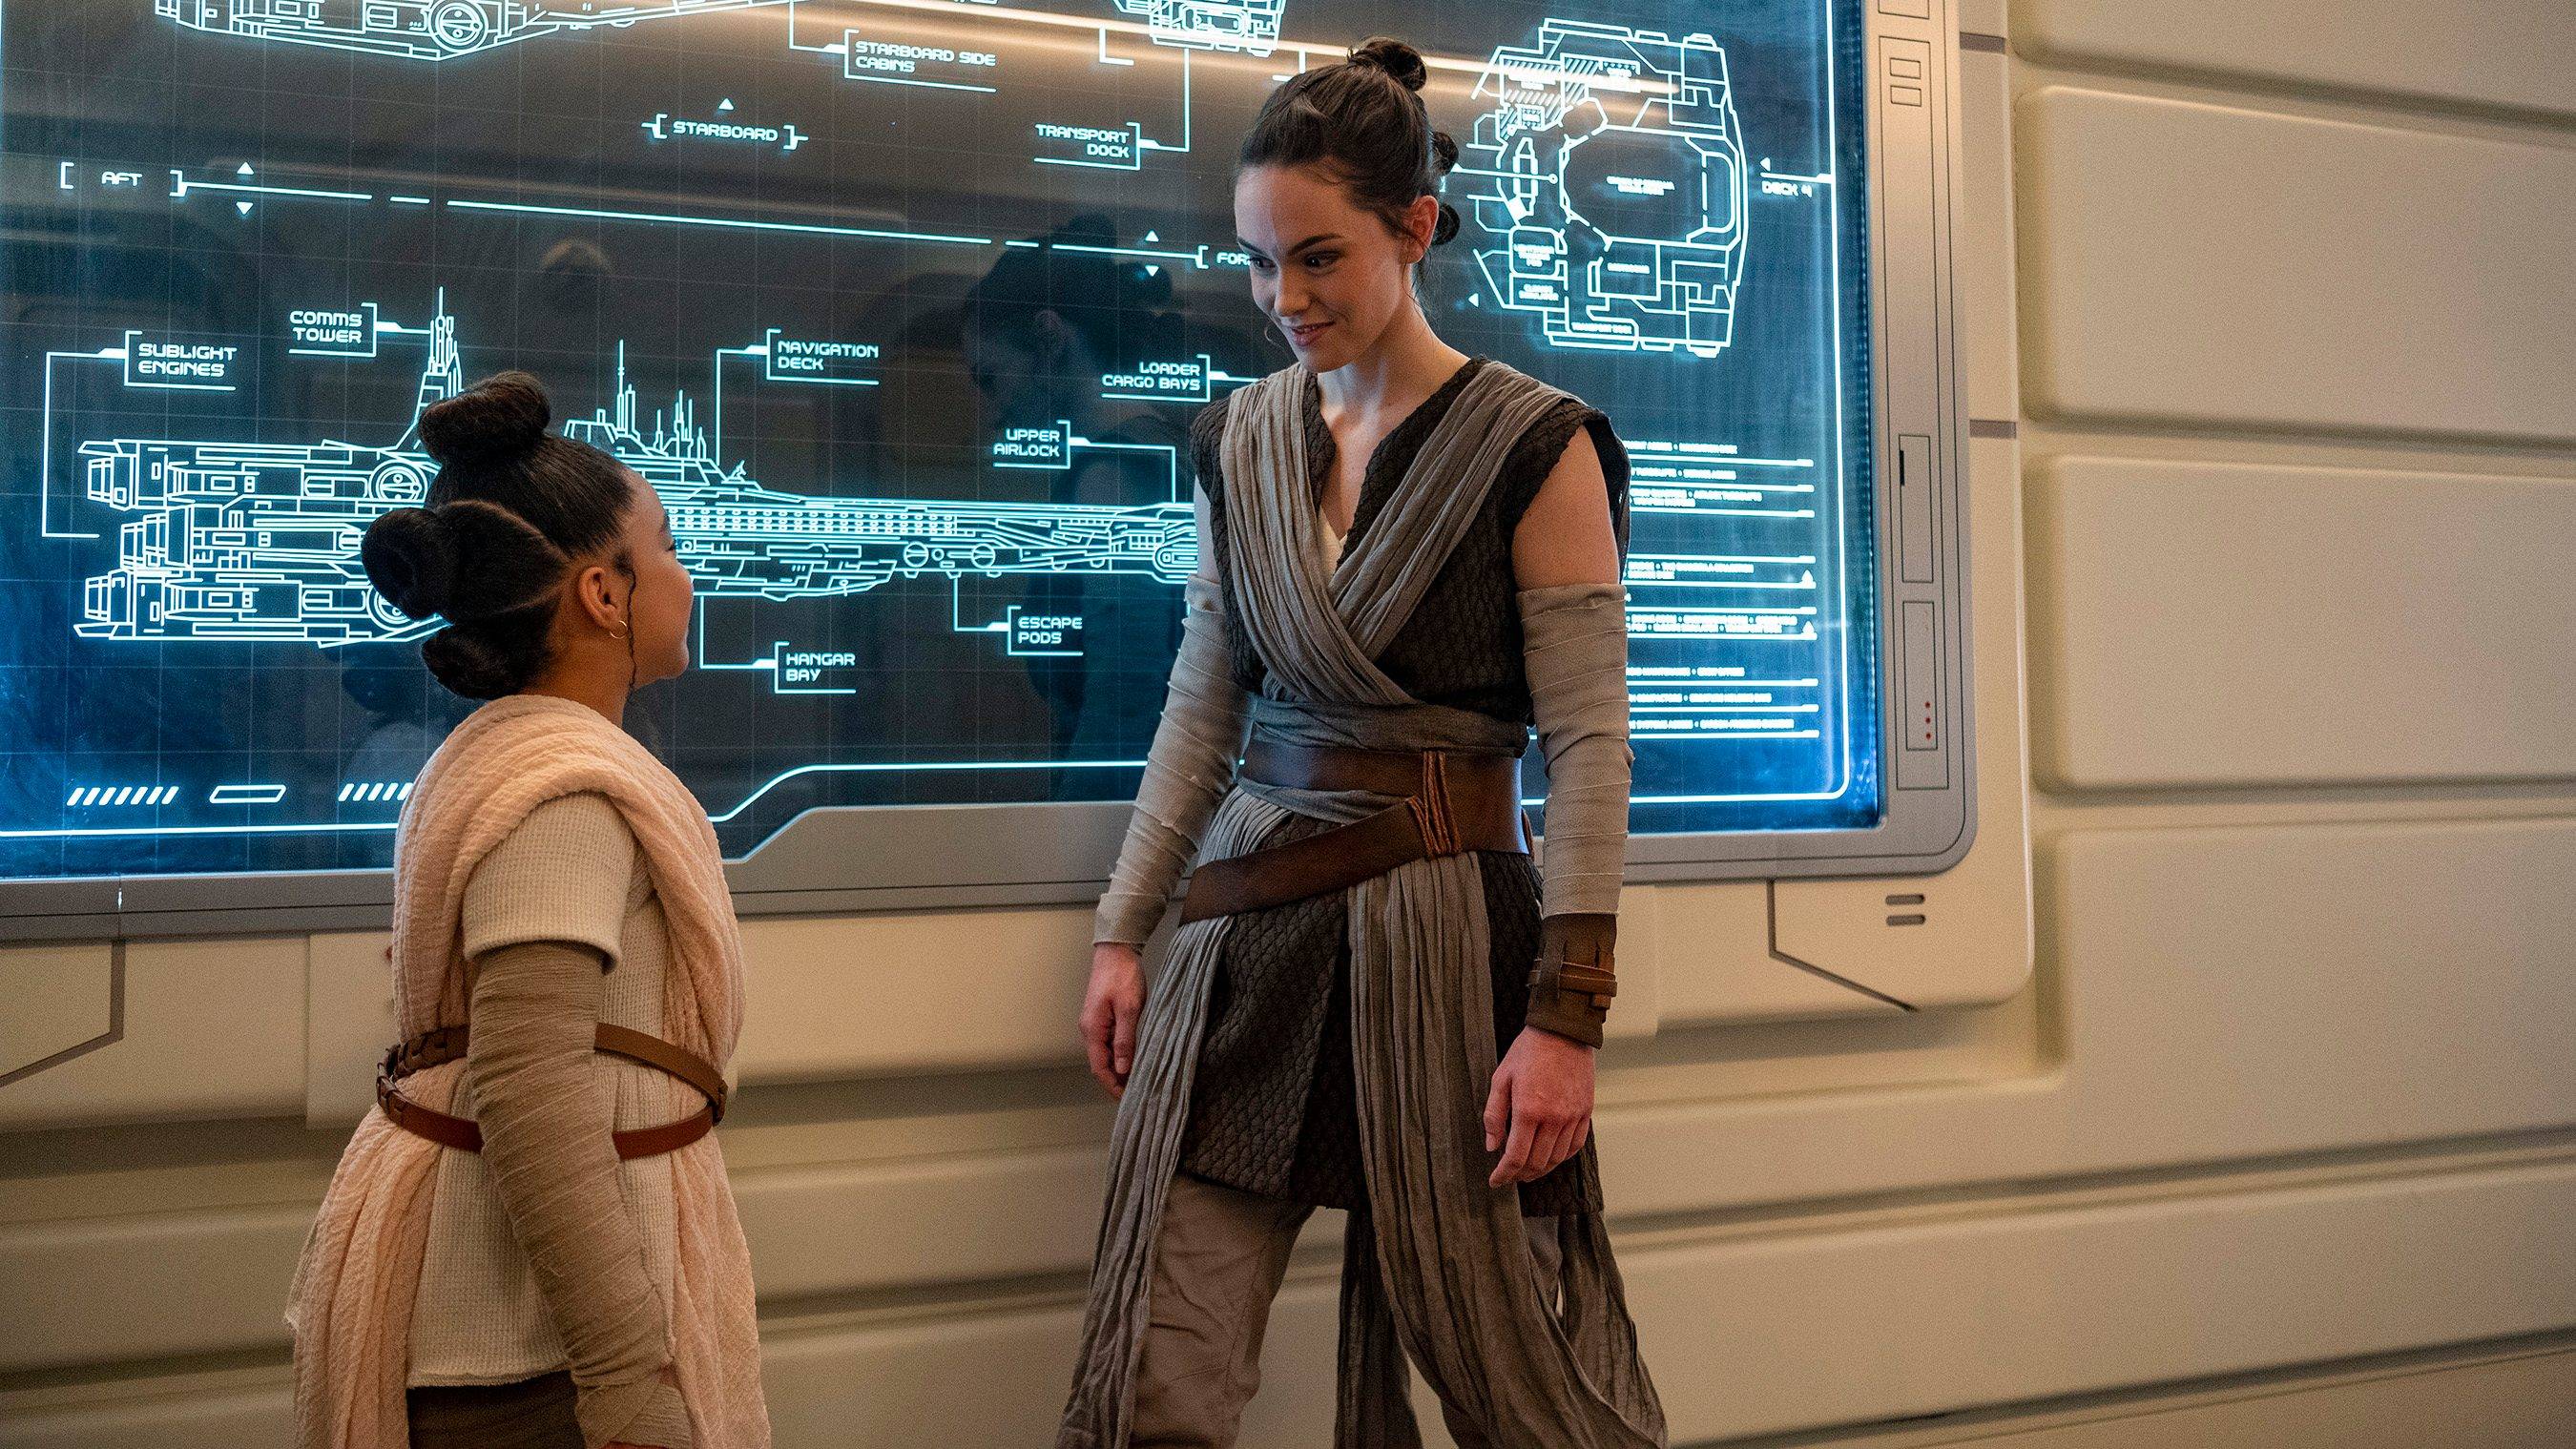 Guests are able to interact closely with characters onboard Star Wars Galactic Starcruiser